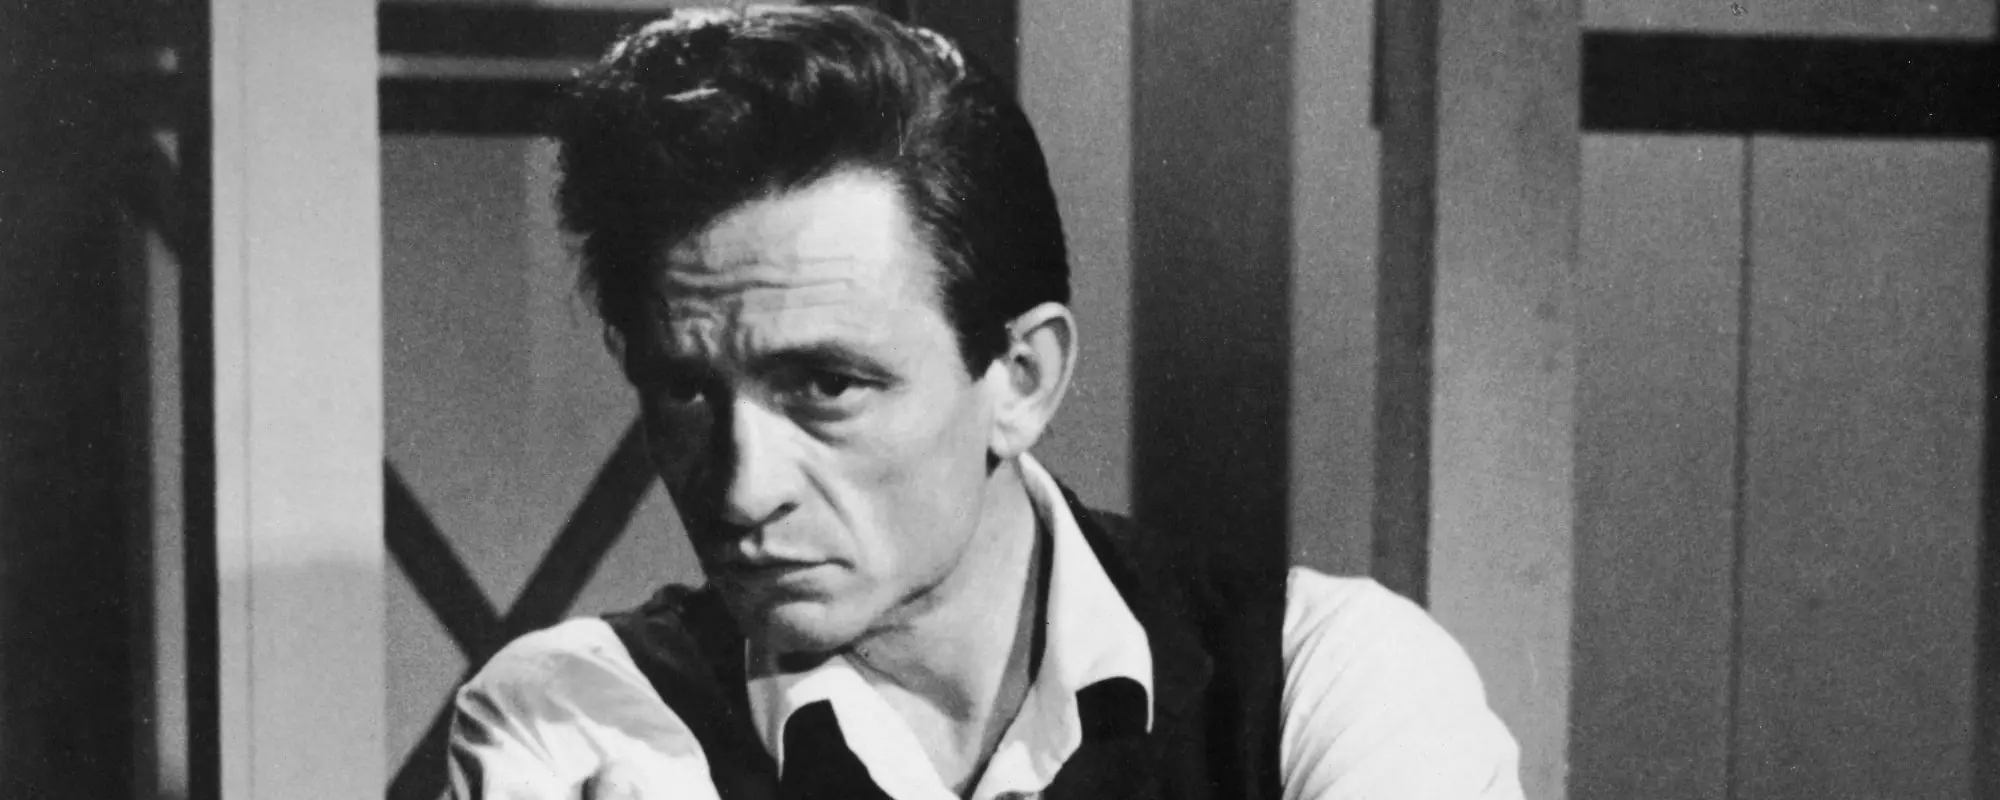 Country Flashback: Johnny Cash Recorded His First No. 1 Single “I Walk the Line” on This Day in 1956